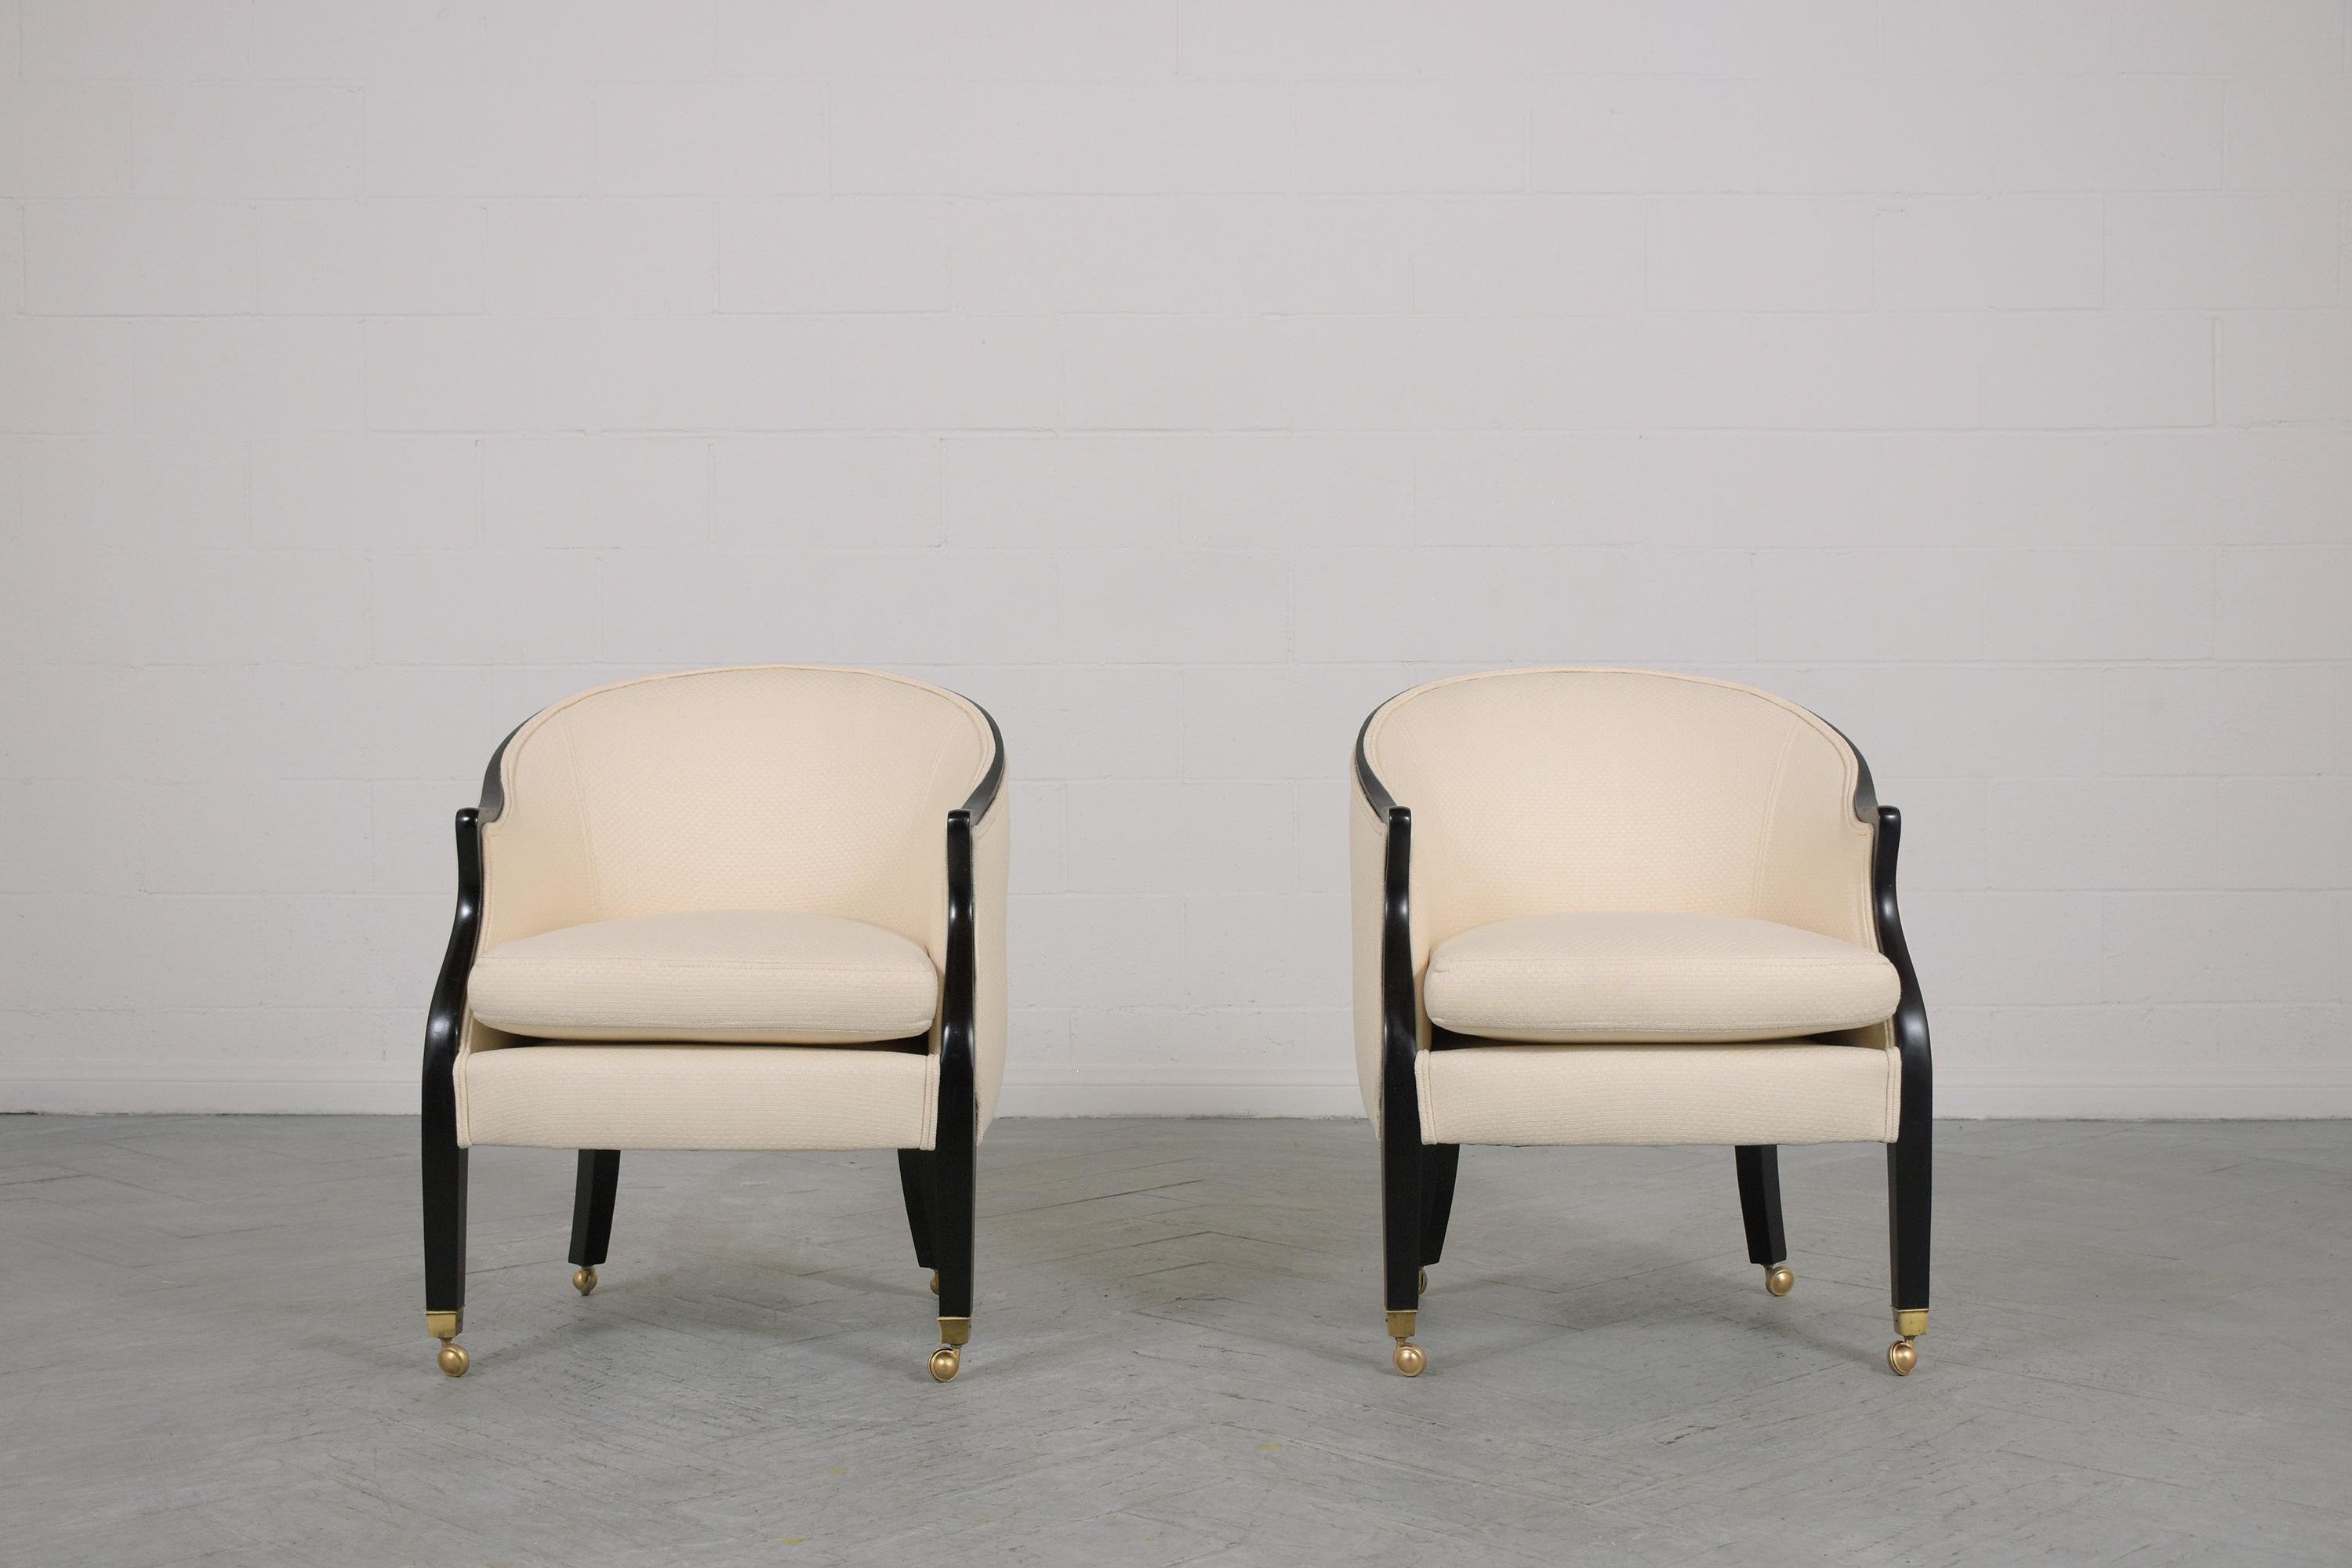 An extraordinary pair of lounge chairs by Baker is beautifully hand-crafted out of mahogany wood in great condition and have been fully restored refinished and upholstered by our expert craftsmen team. This 1960s pair of armchairs features a solid